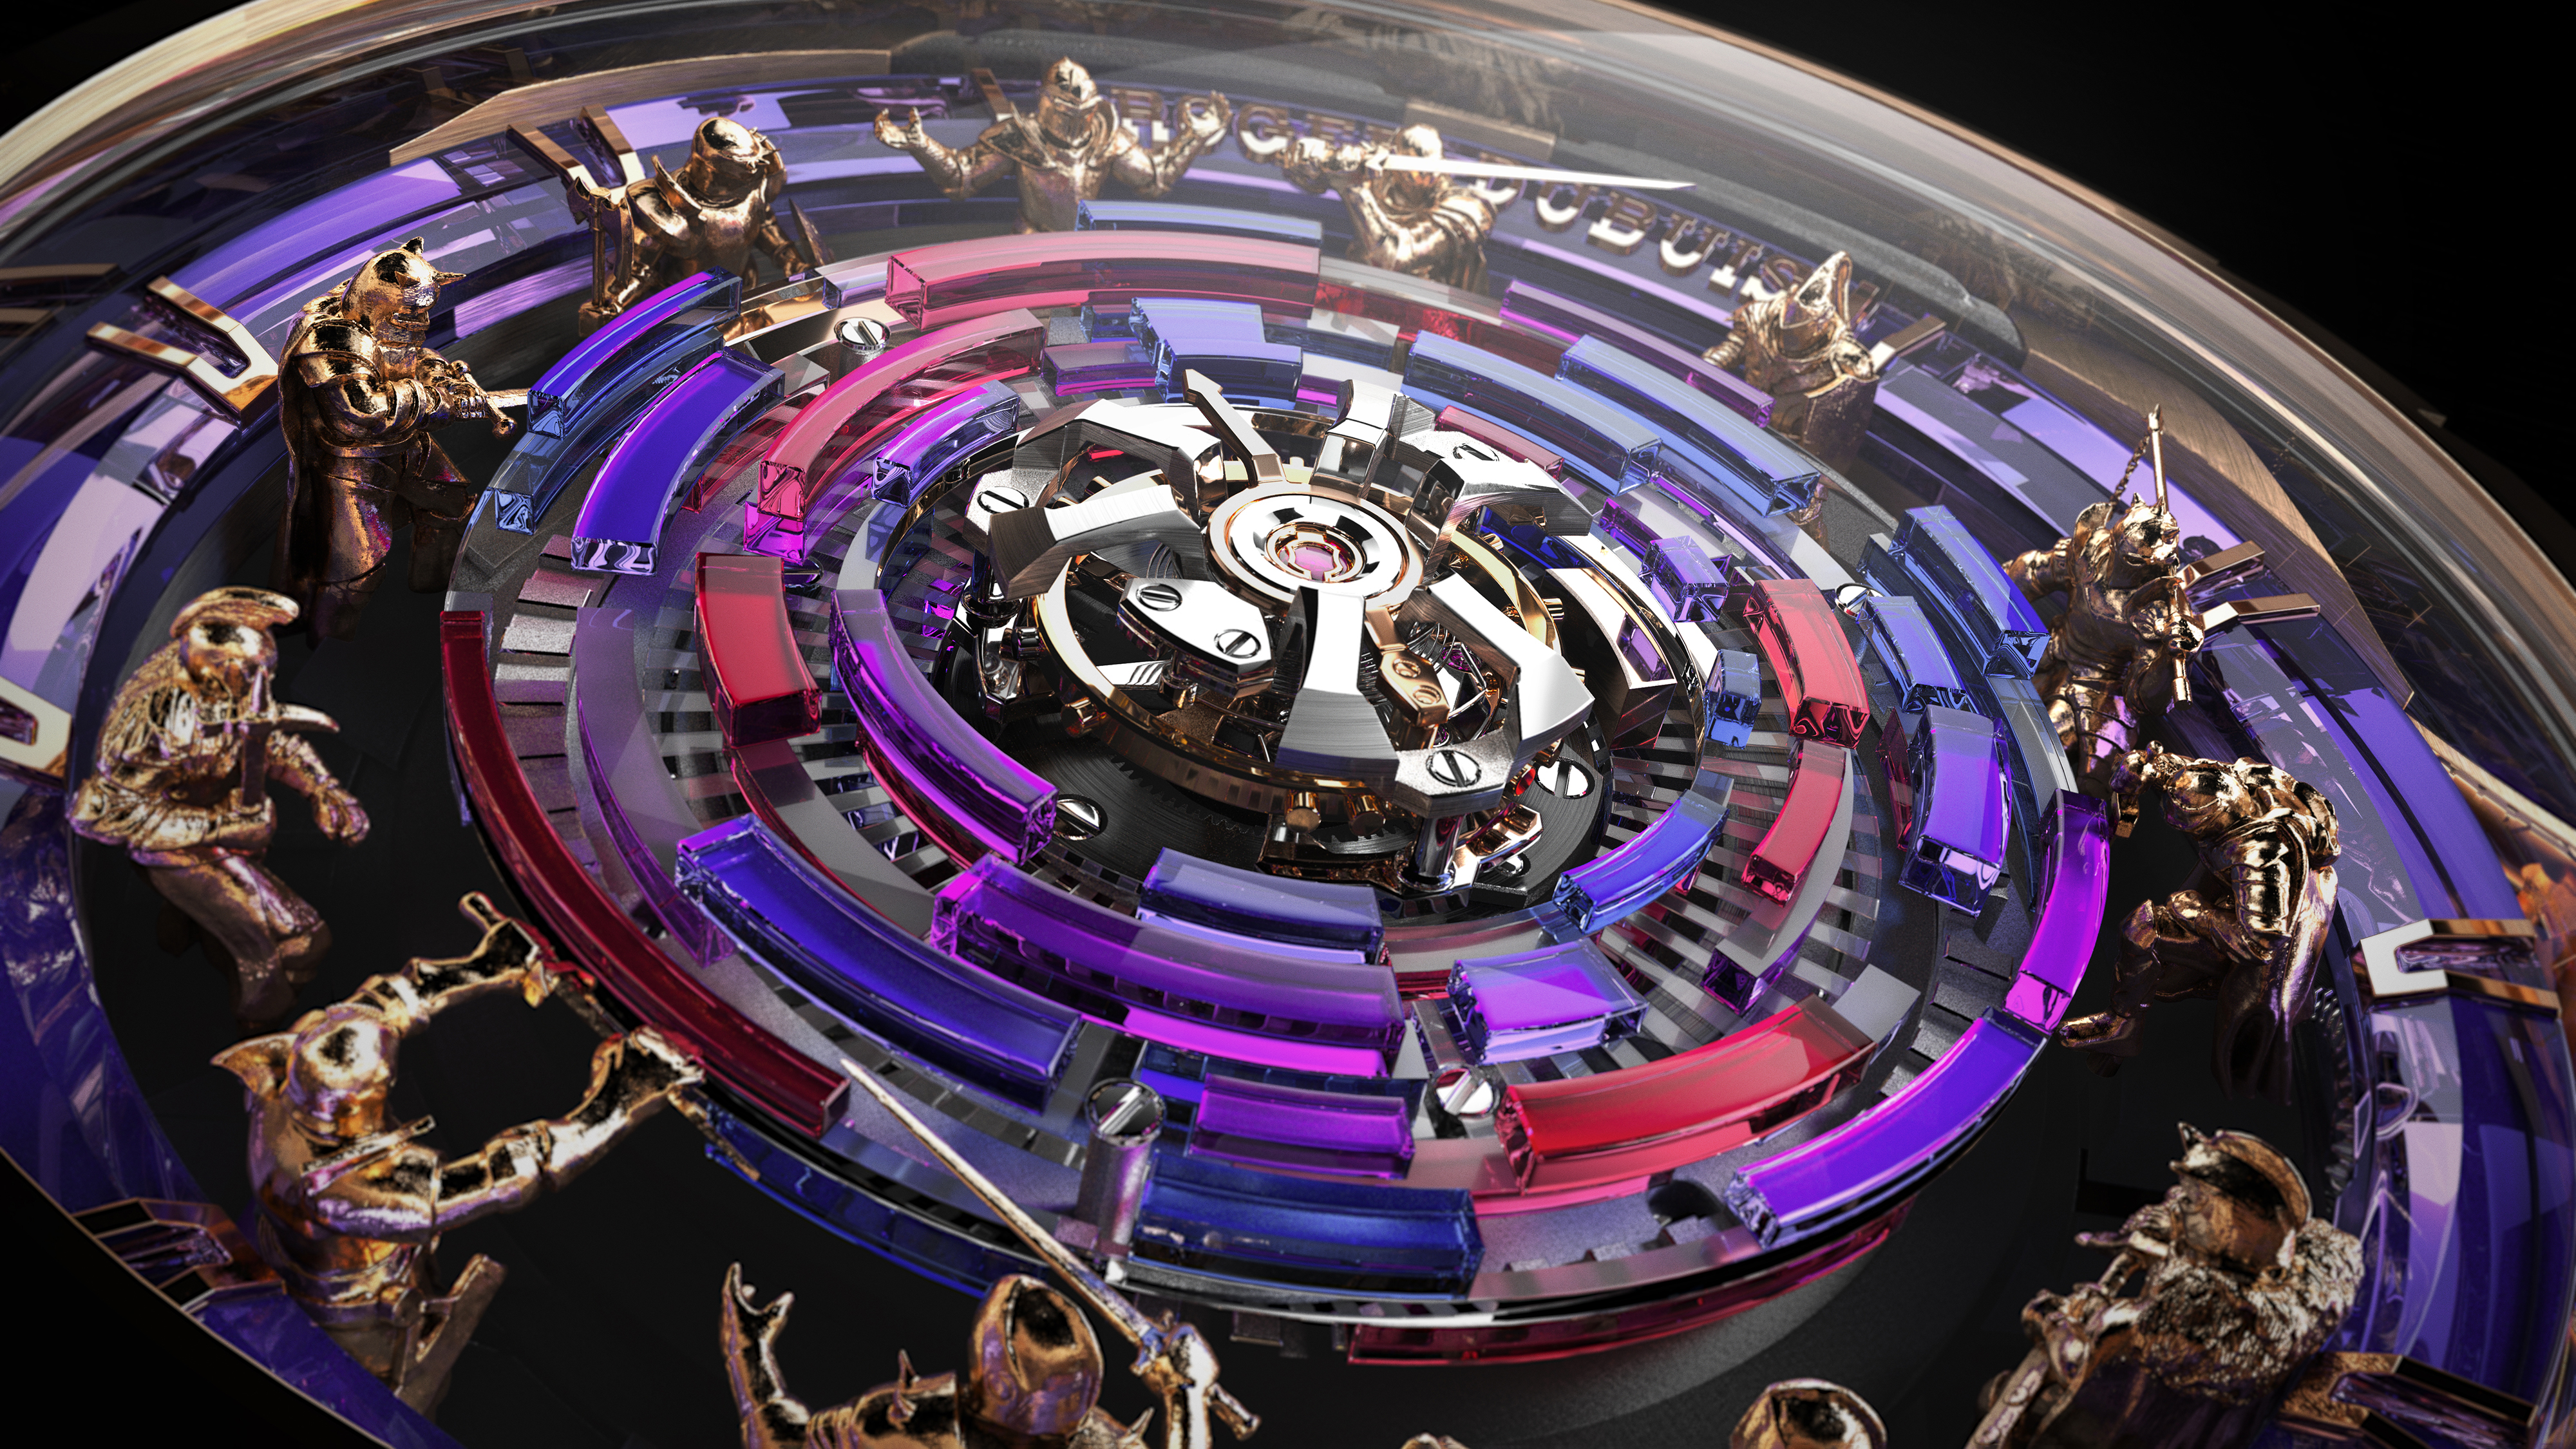 Roger Dubuis Knights of the Round Table Monotourbillon